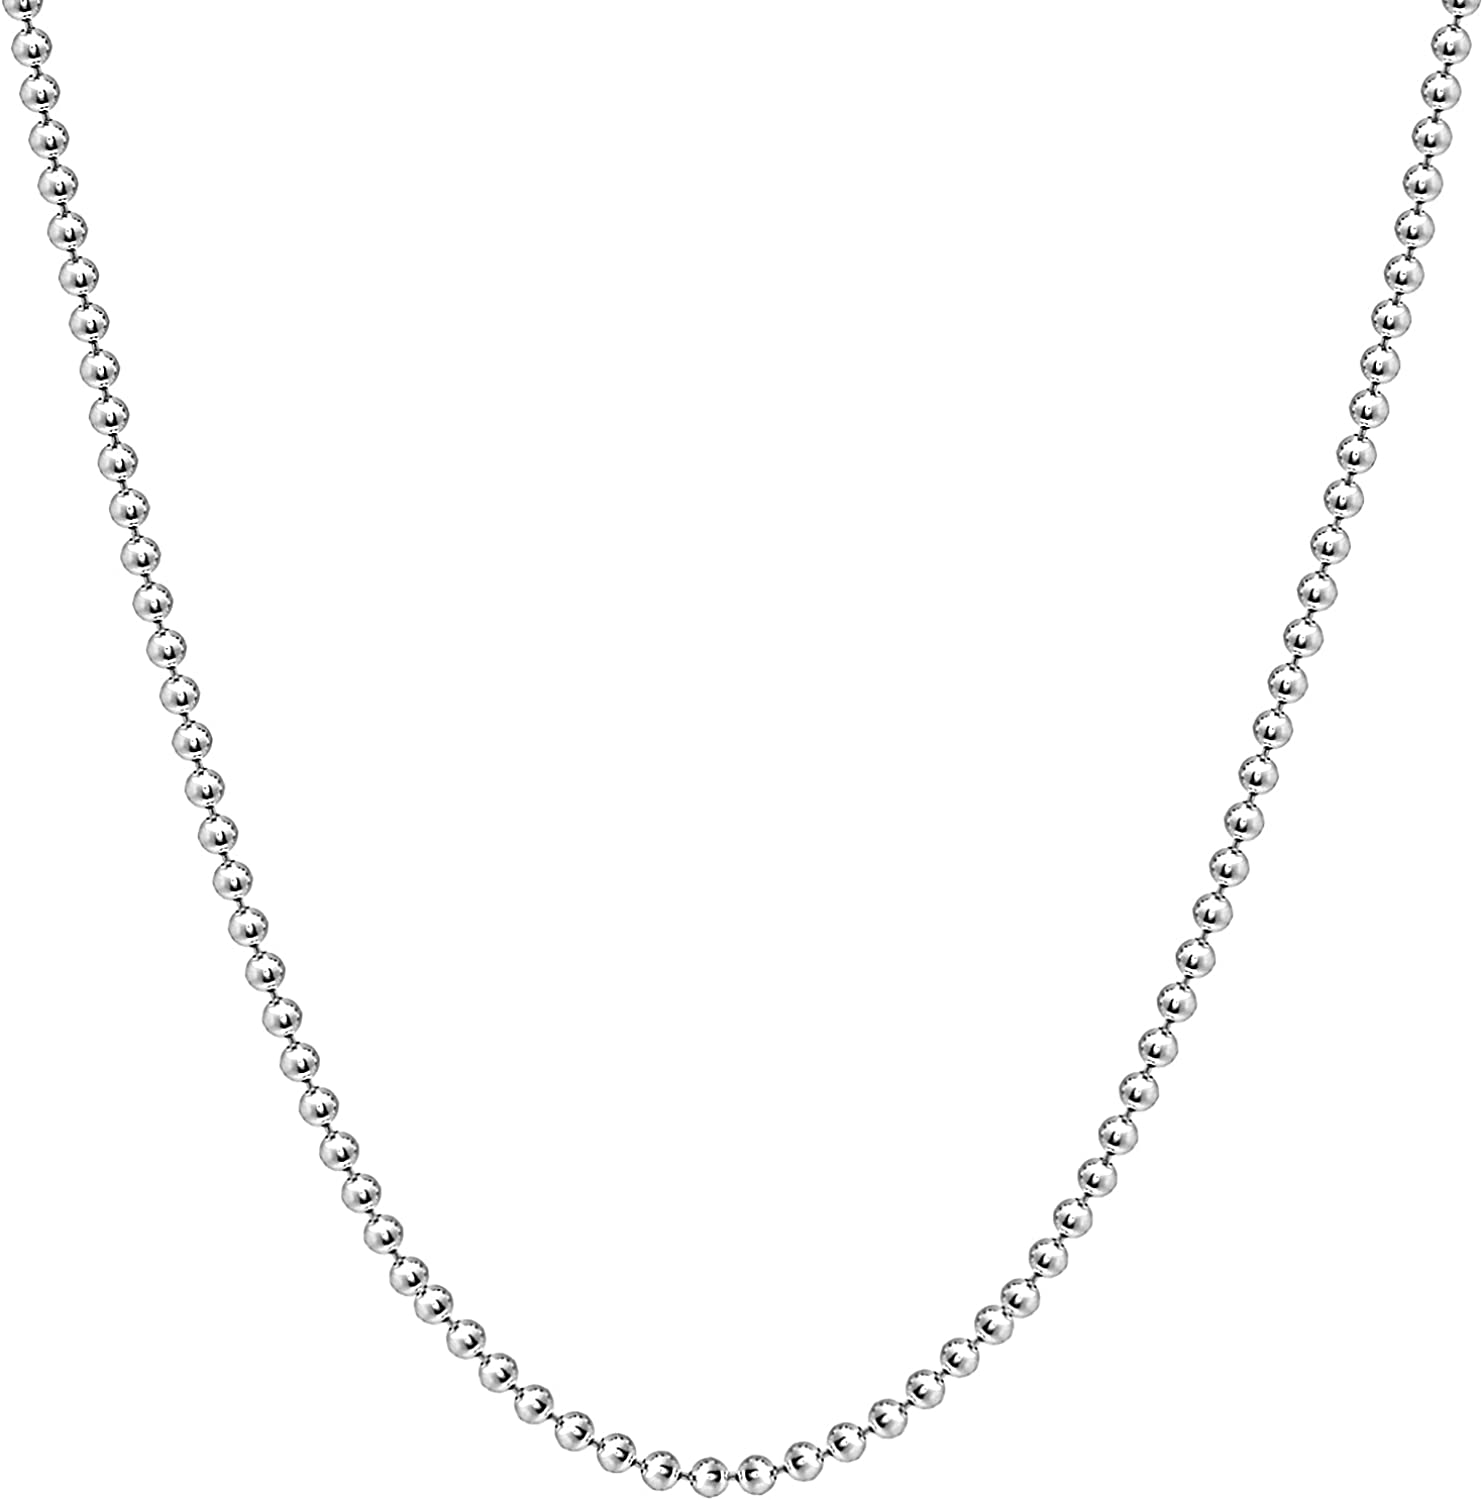 Savlano 925 Sterling Silver Italian Solid Bead Ball Dog Tag Chain Necklace Comes With Gift Box for Women & Men - Made in Italy